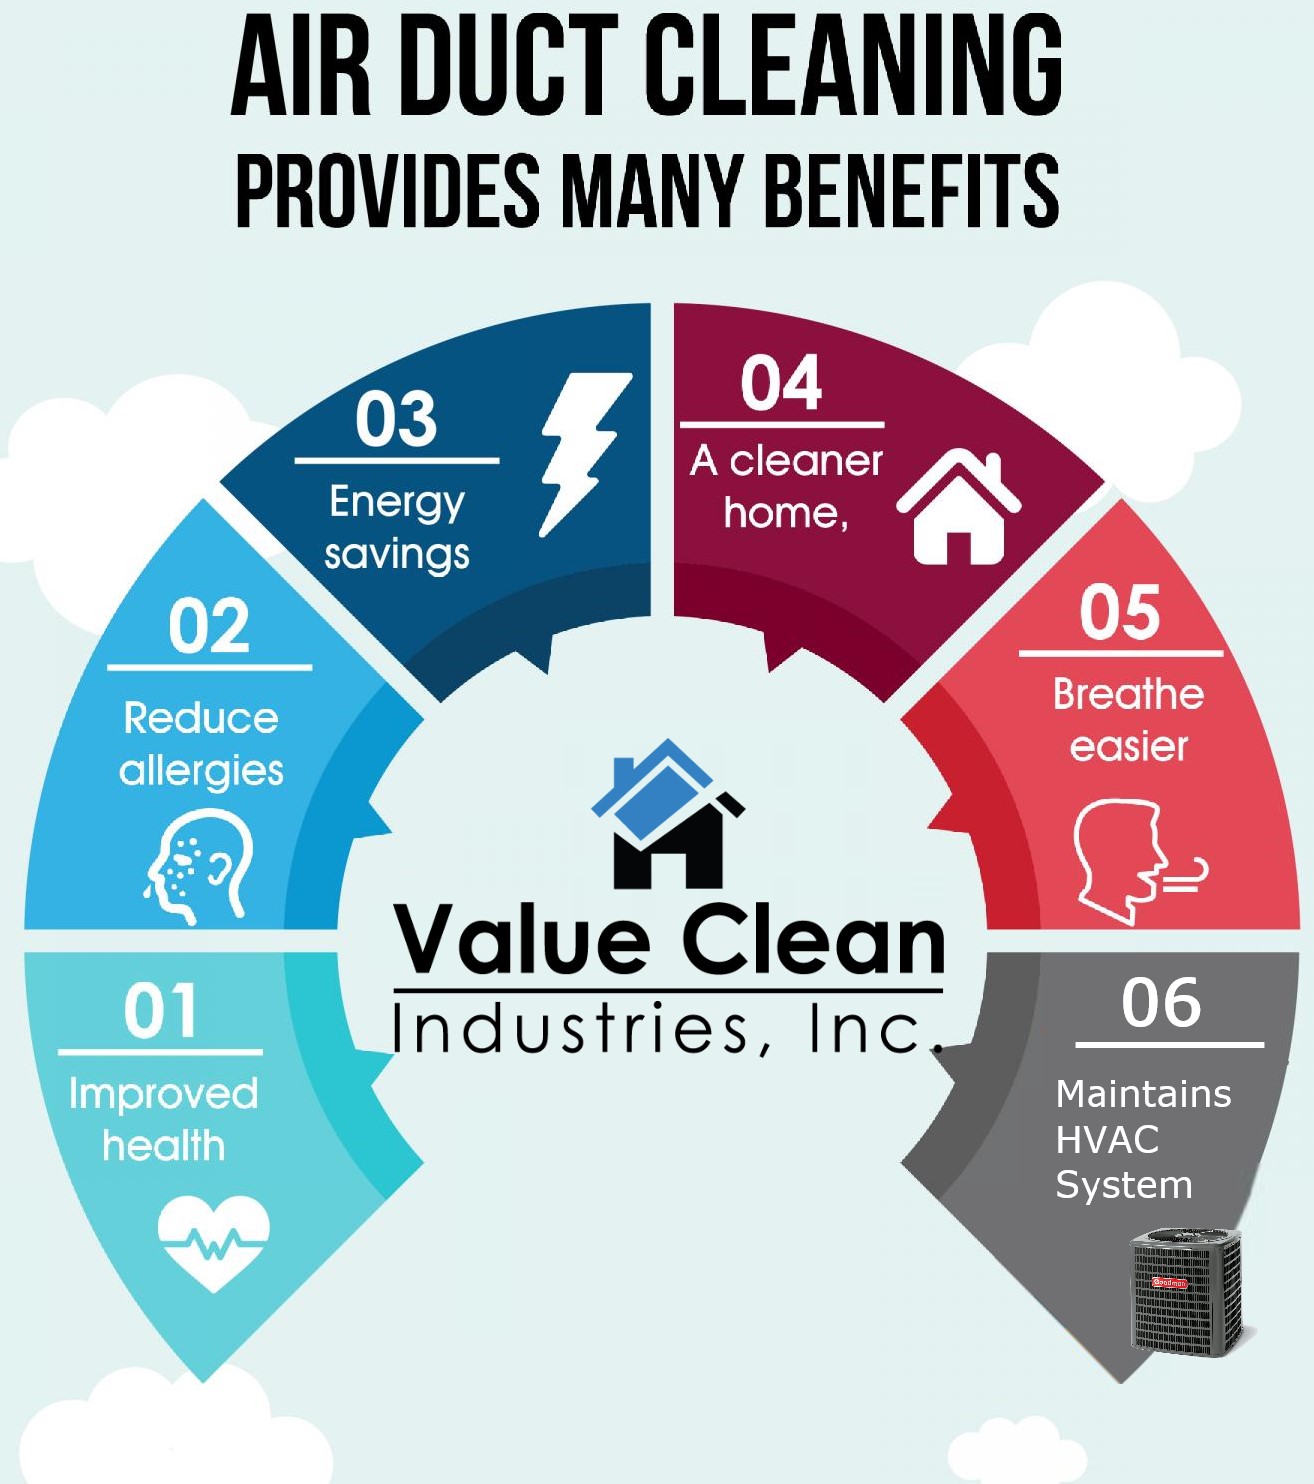 Benefits of HVAC Cleaning